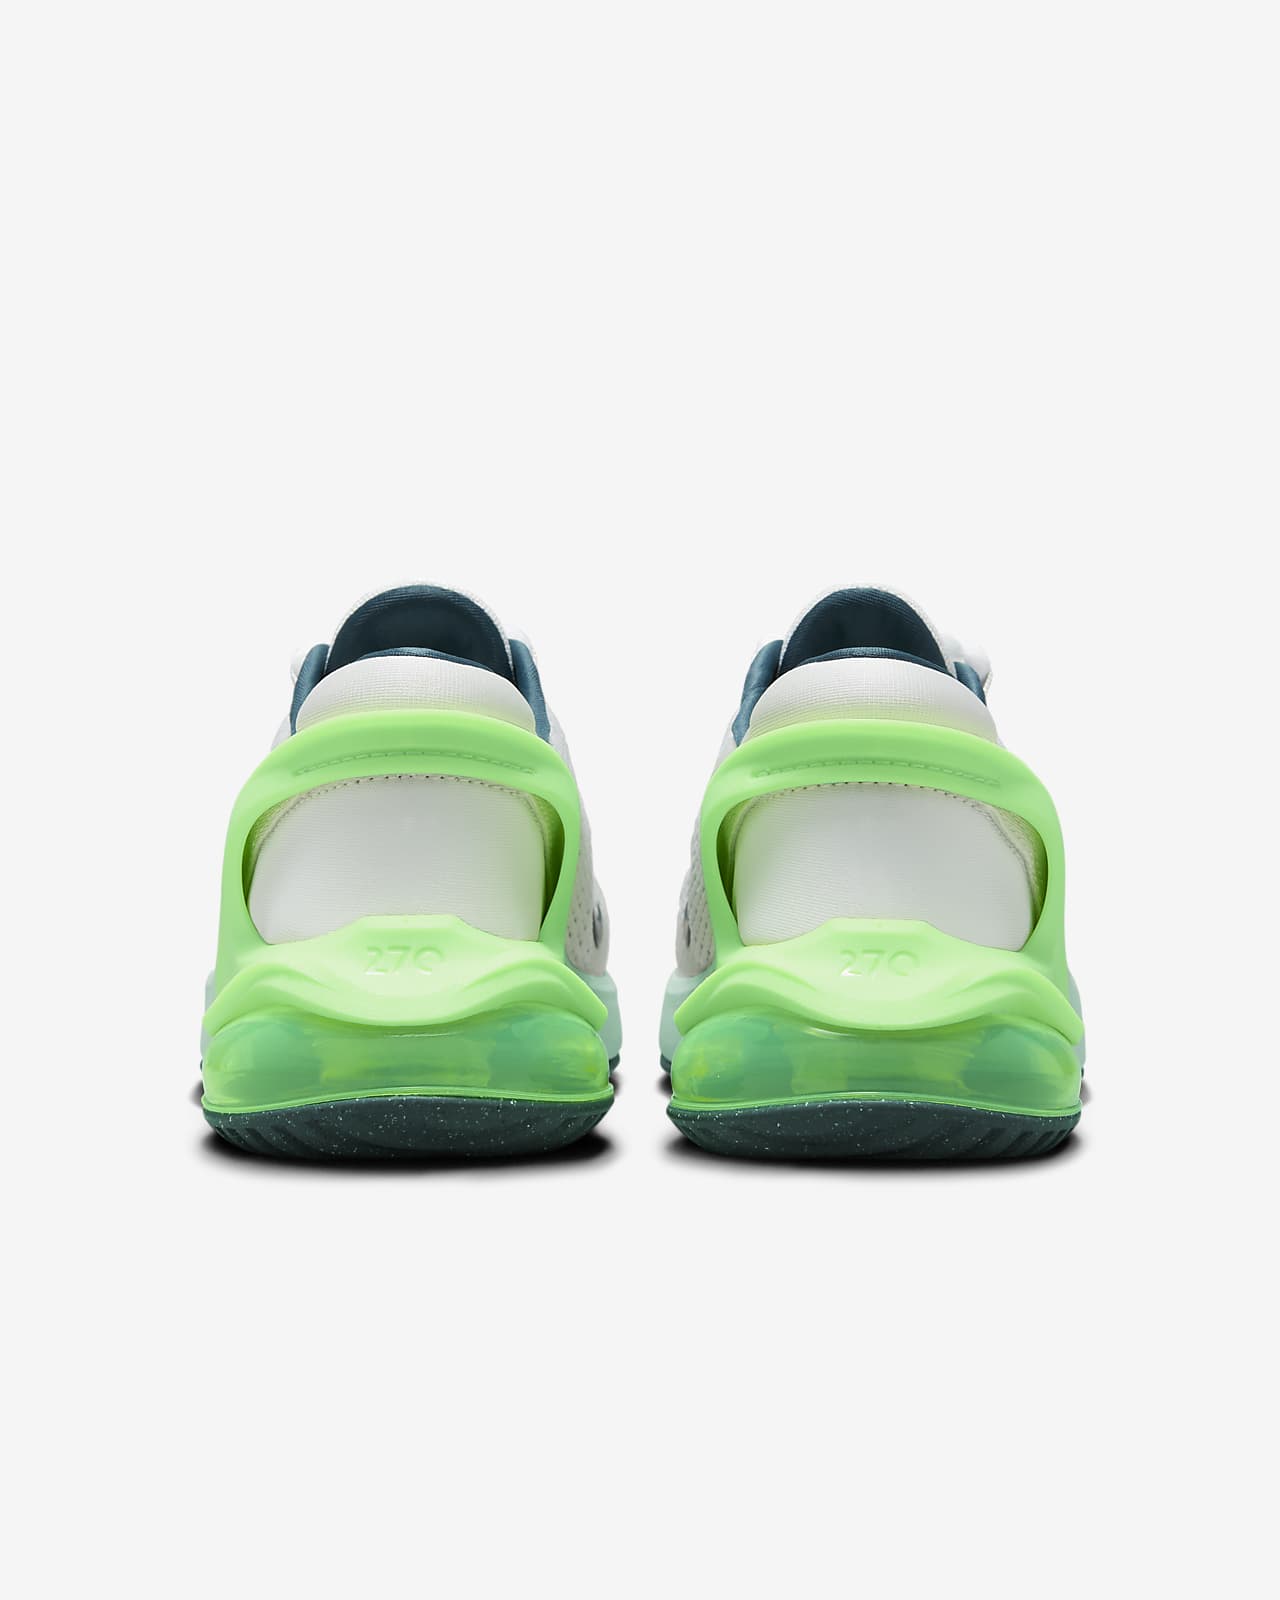 Nike Air Max 270 GO Little Kids' Easy On/Off Shoes.